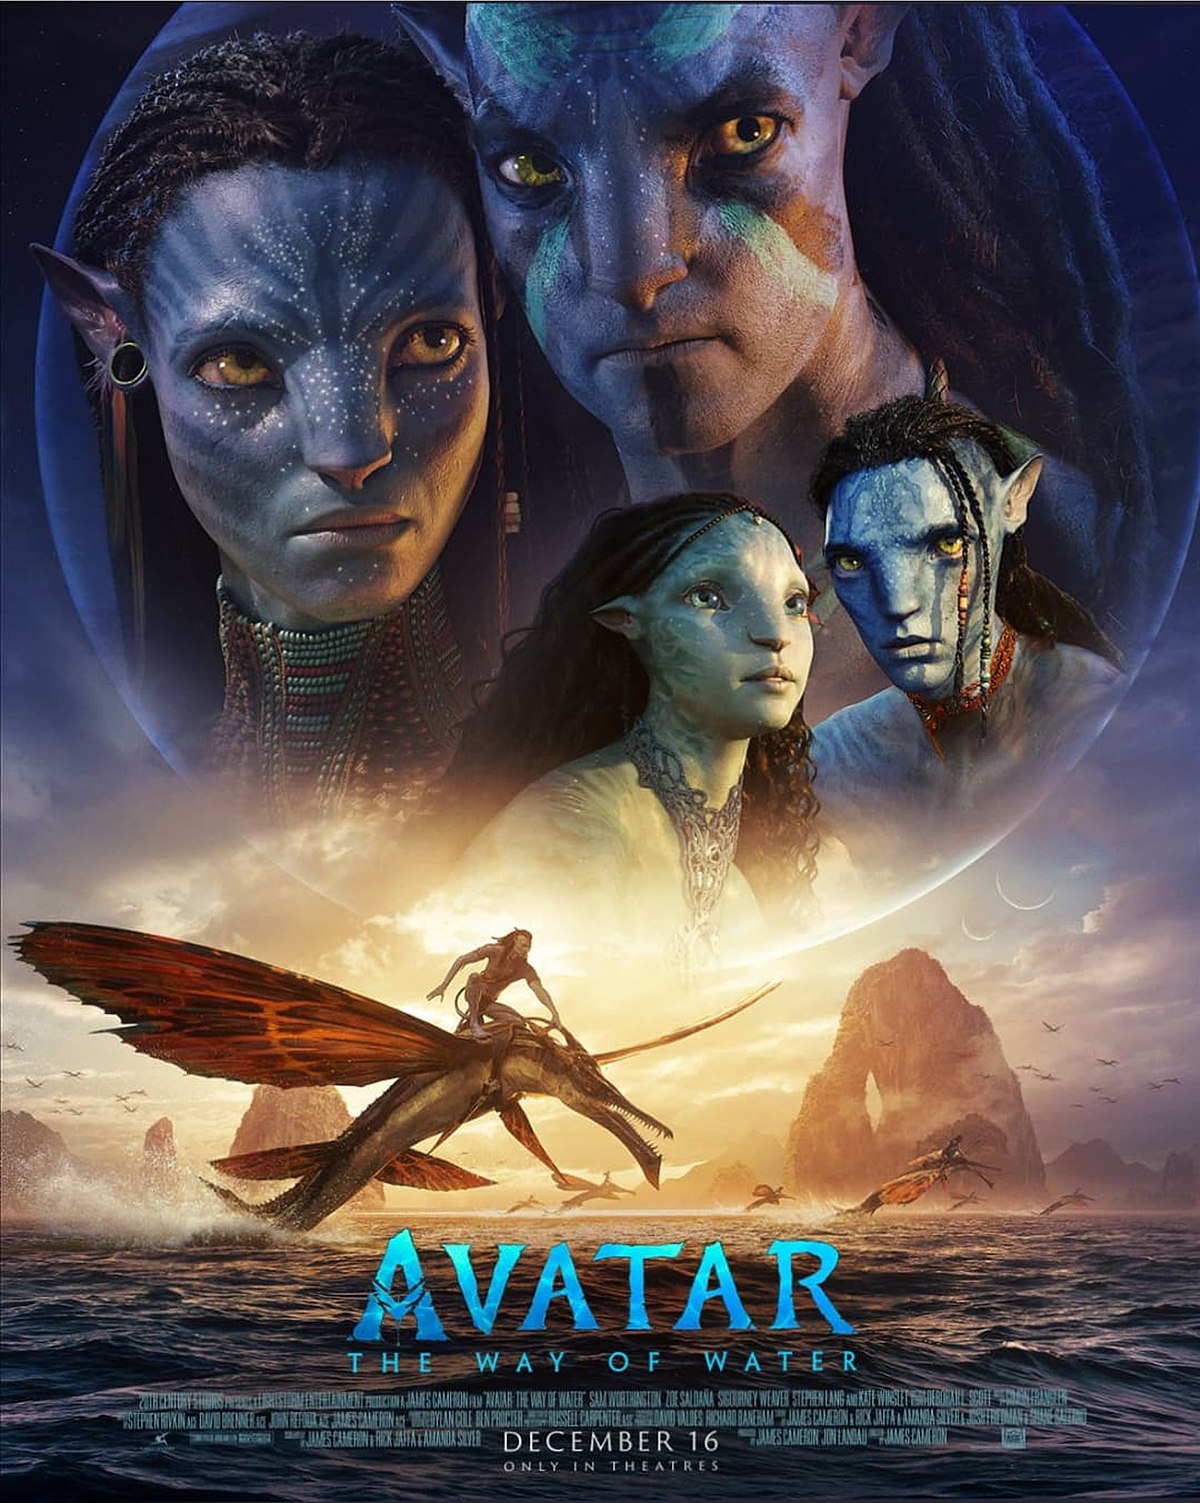 Avatar The Way of Water Trailer & Poster